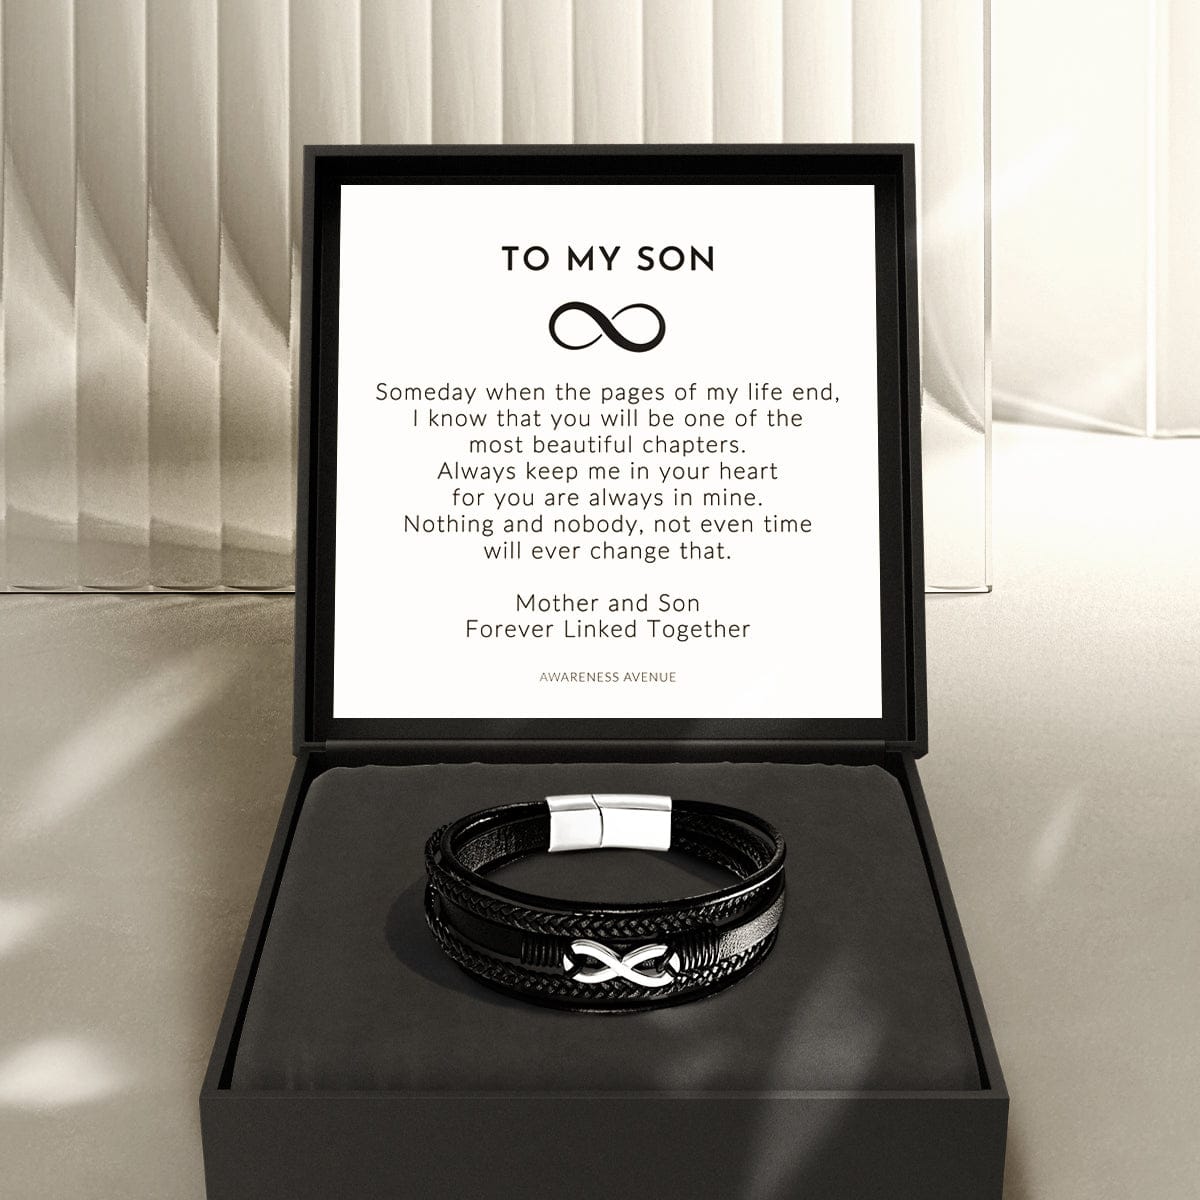 To My Son | I Will Always Be With You | Leather Bracelet